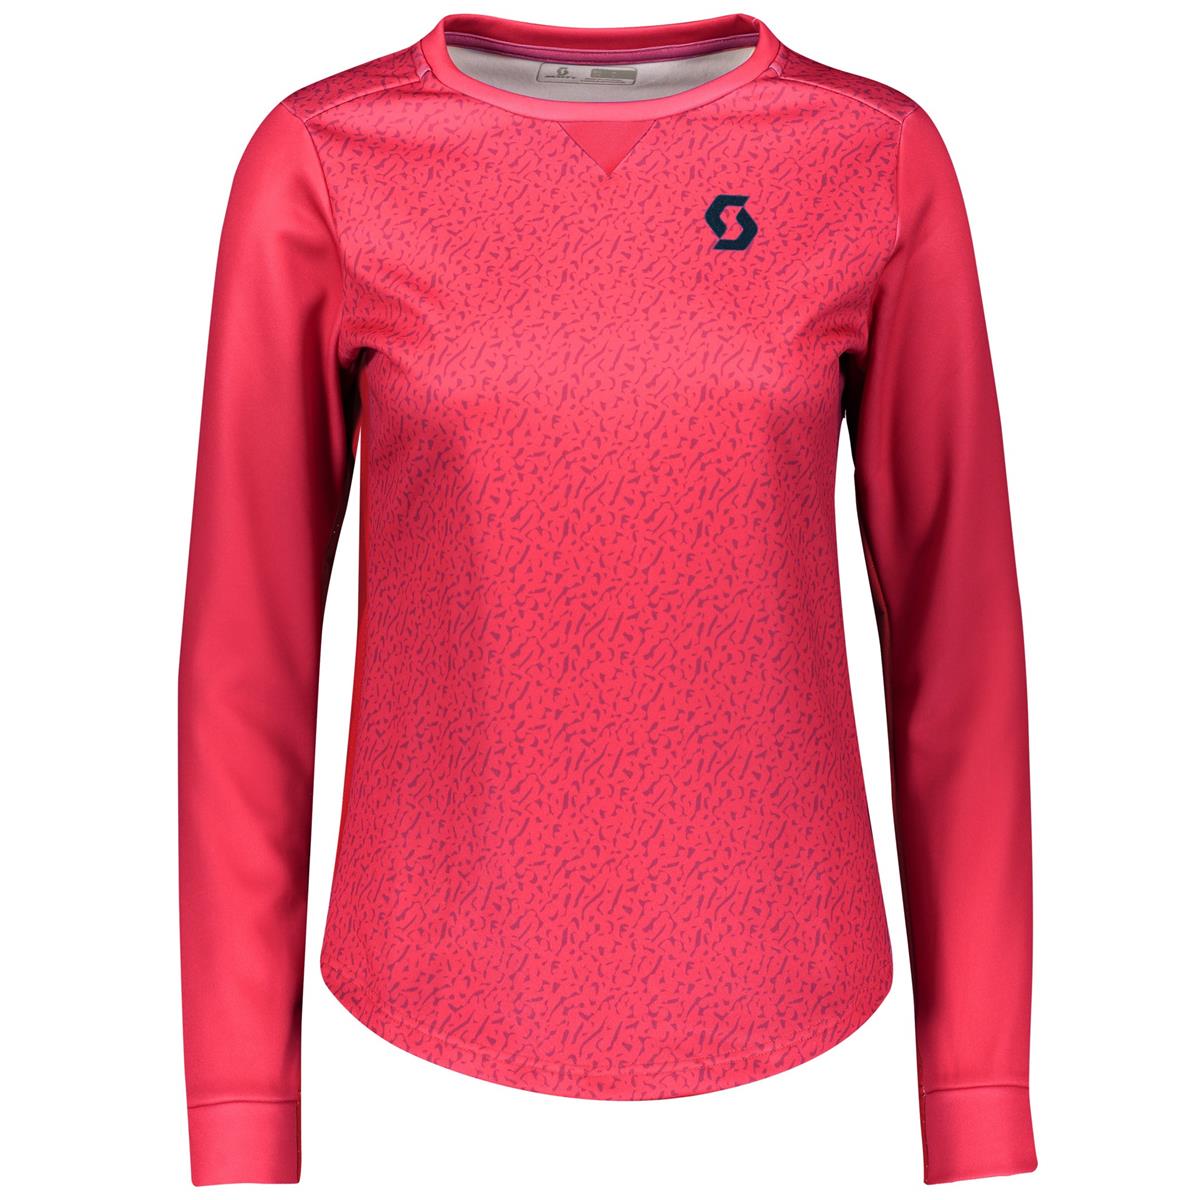 Scott Femme Maillot VTT Manches Longues Trail AS Hibiscus Rouge